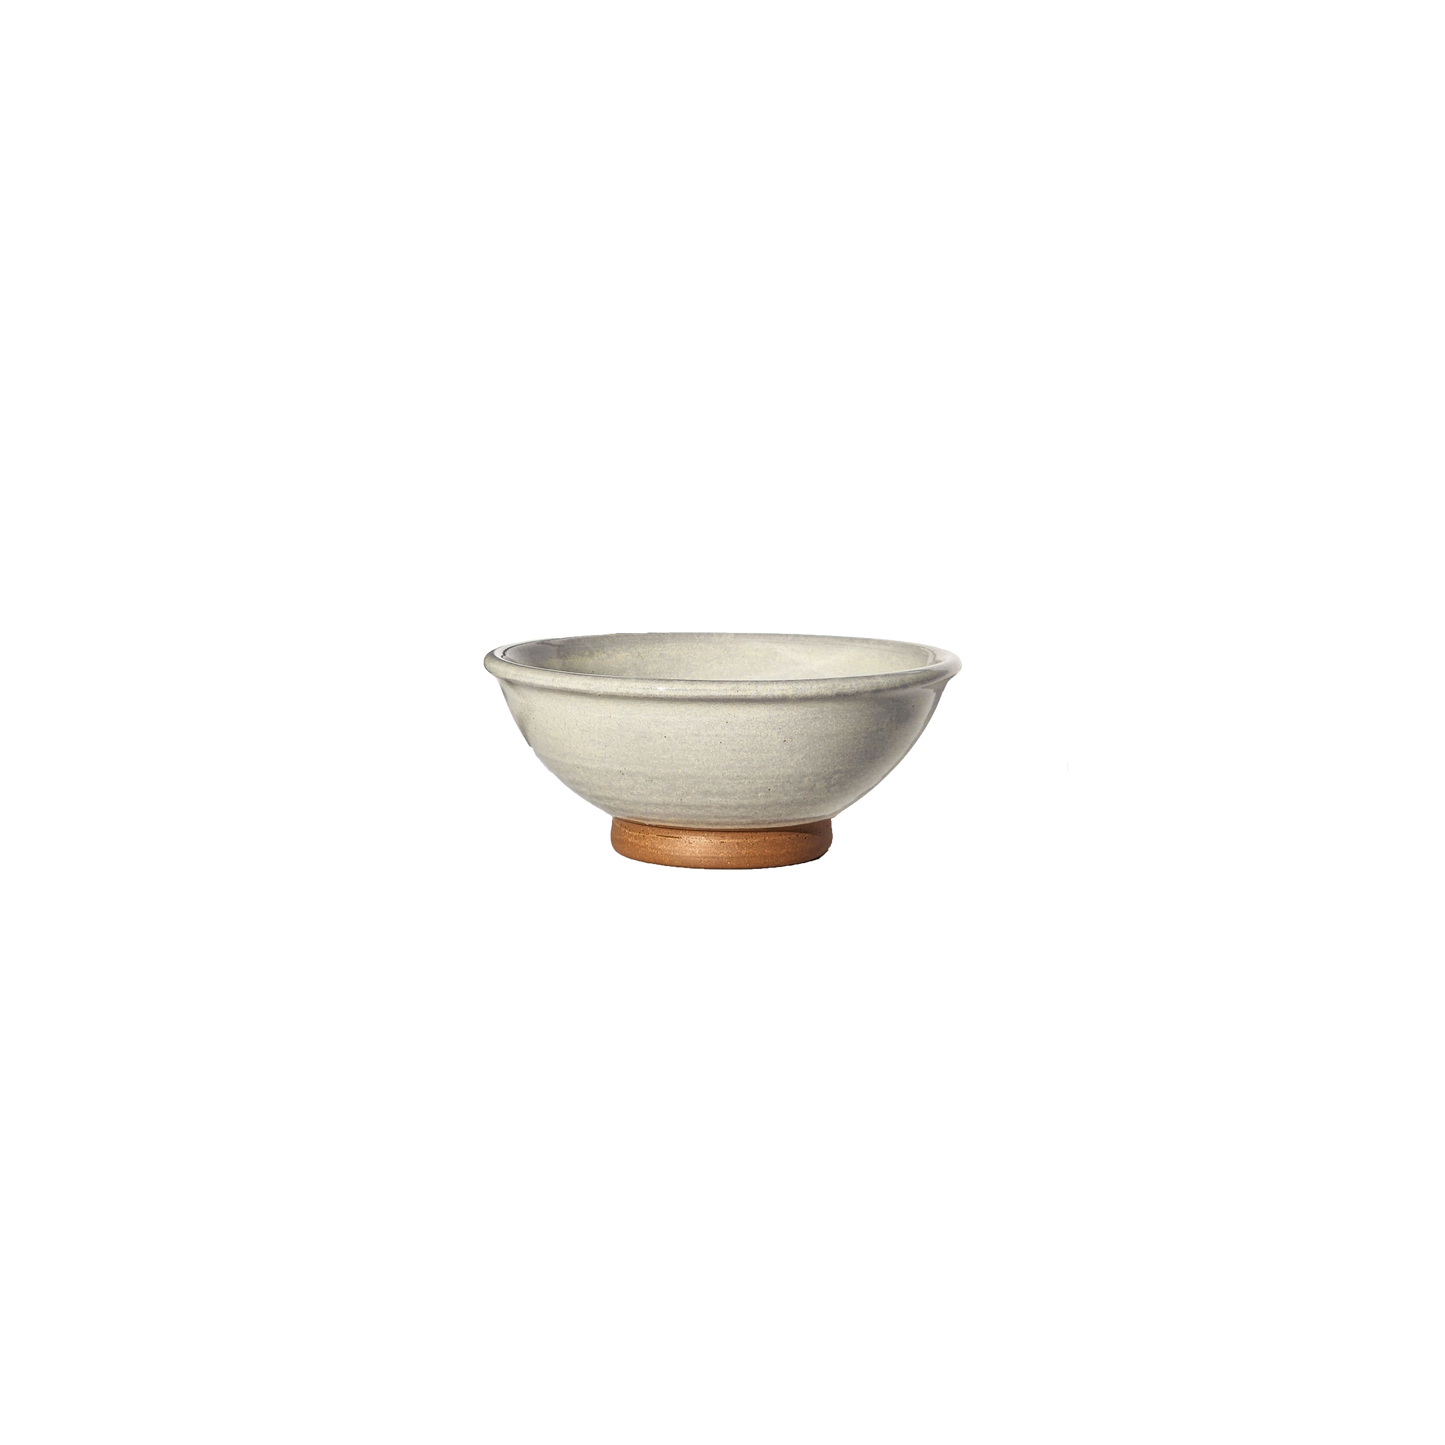 Image: Achieve timeless elegance with this white sugar bowl, offering a versatile addition to any tabletop. Holds 4 ounces of sugar, ensuring your beverages are perfectly sweetened in style.